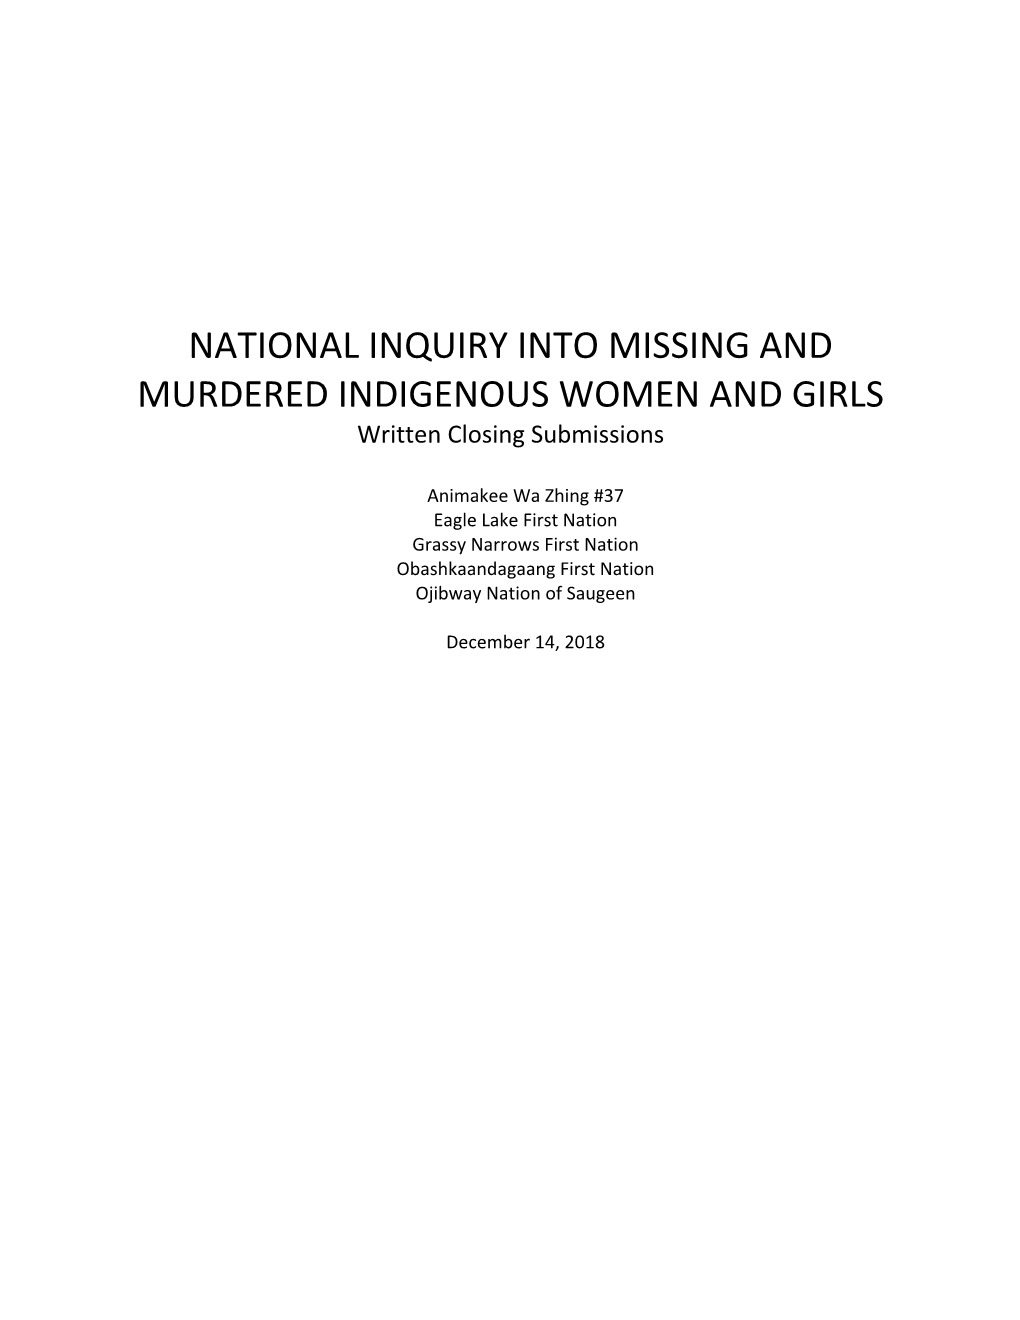 NATIONAL INQUIRY INTO MISSING and MURDERED INDIGENOUS WOMEN and GIRLS Written Closing Submissions